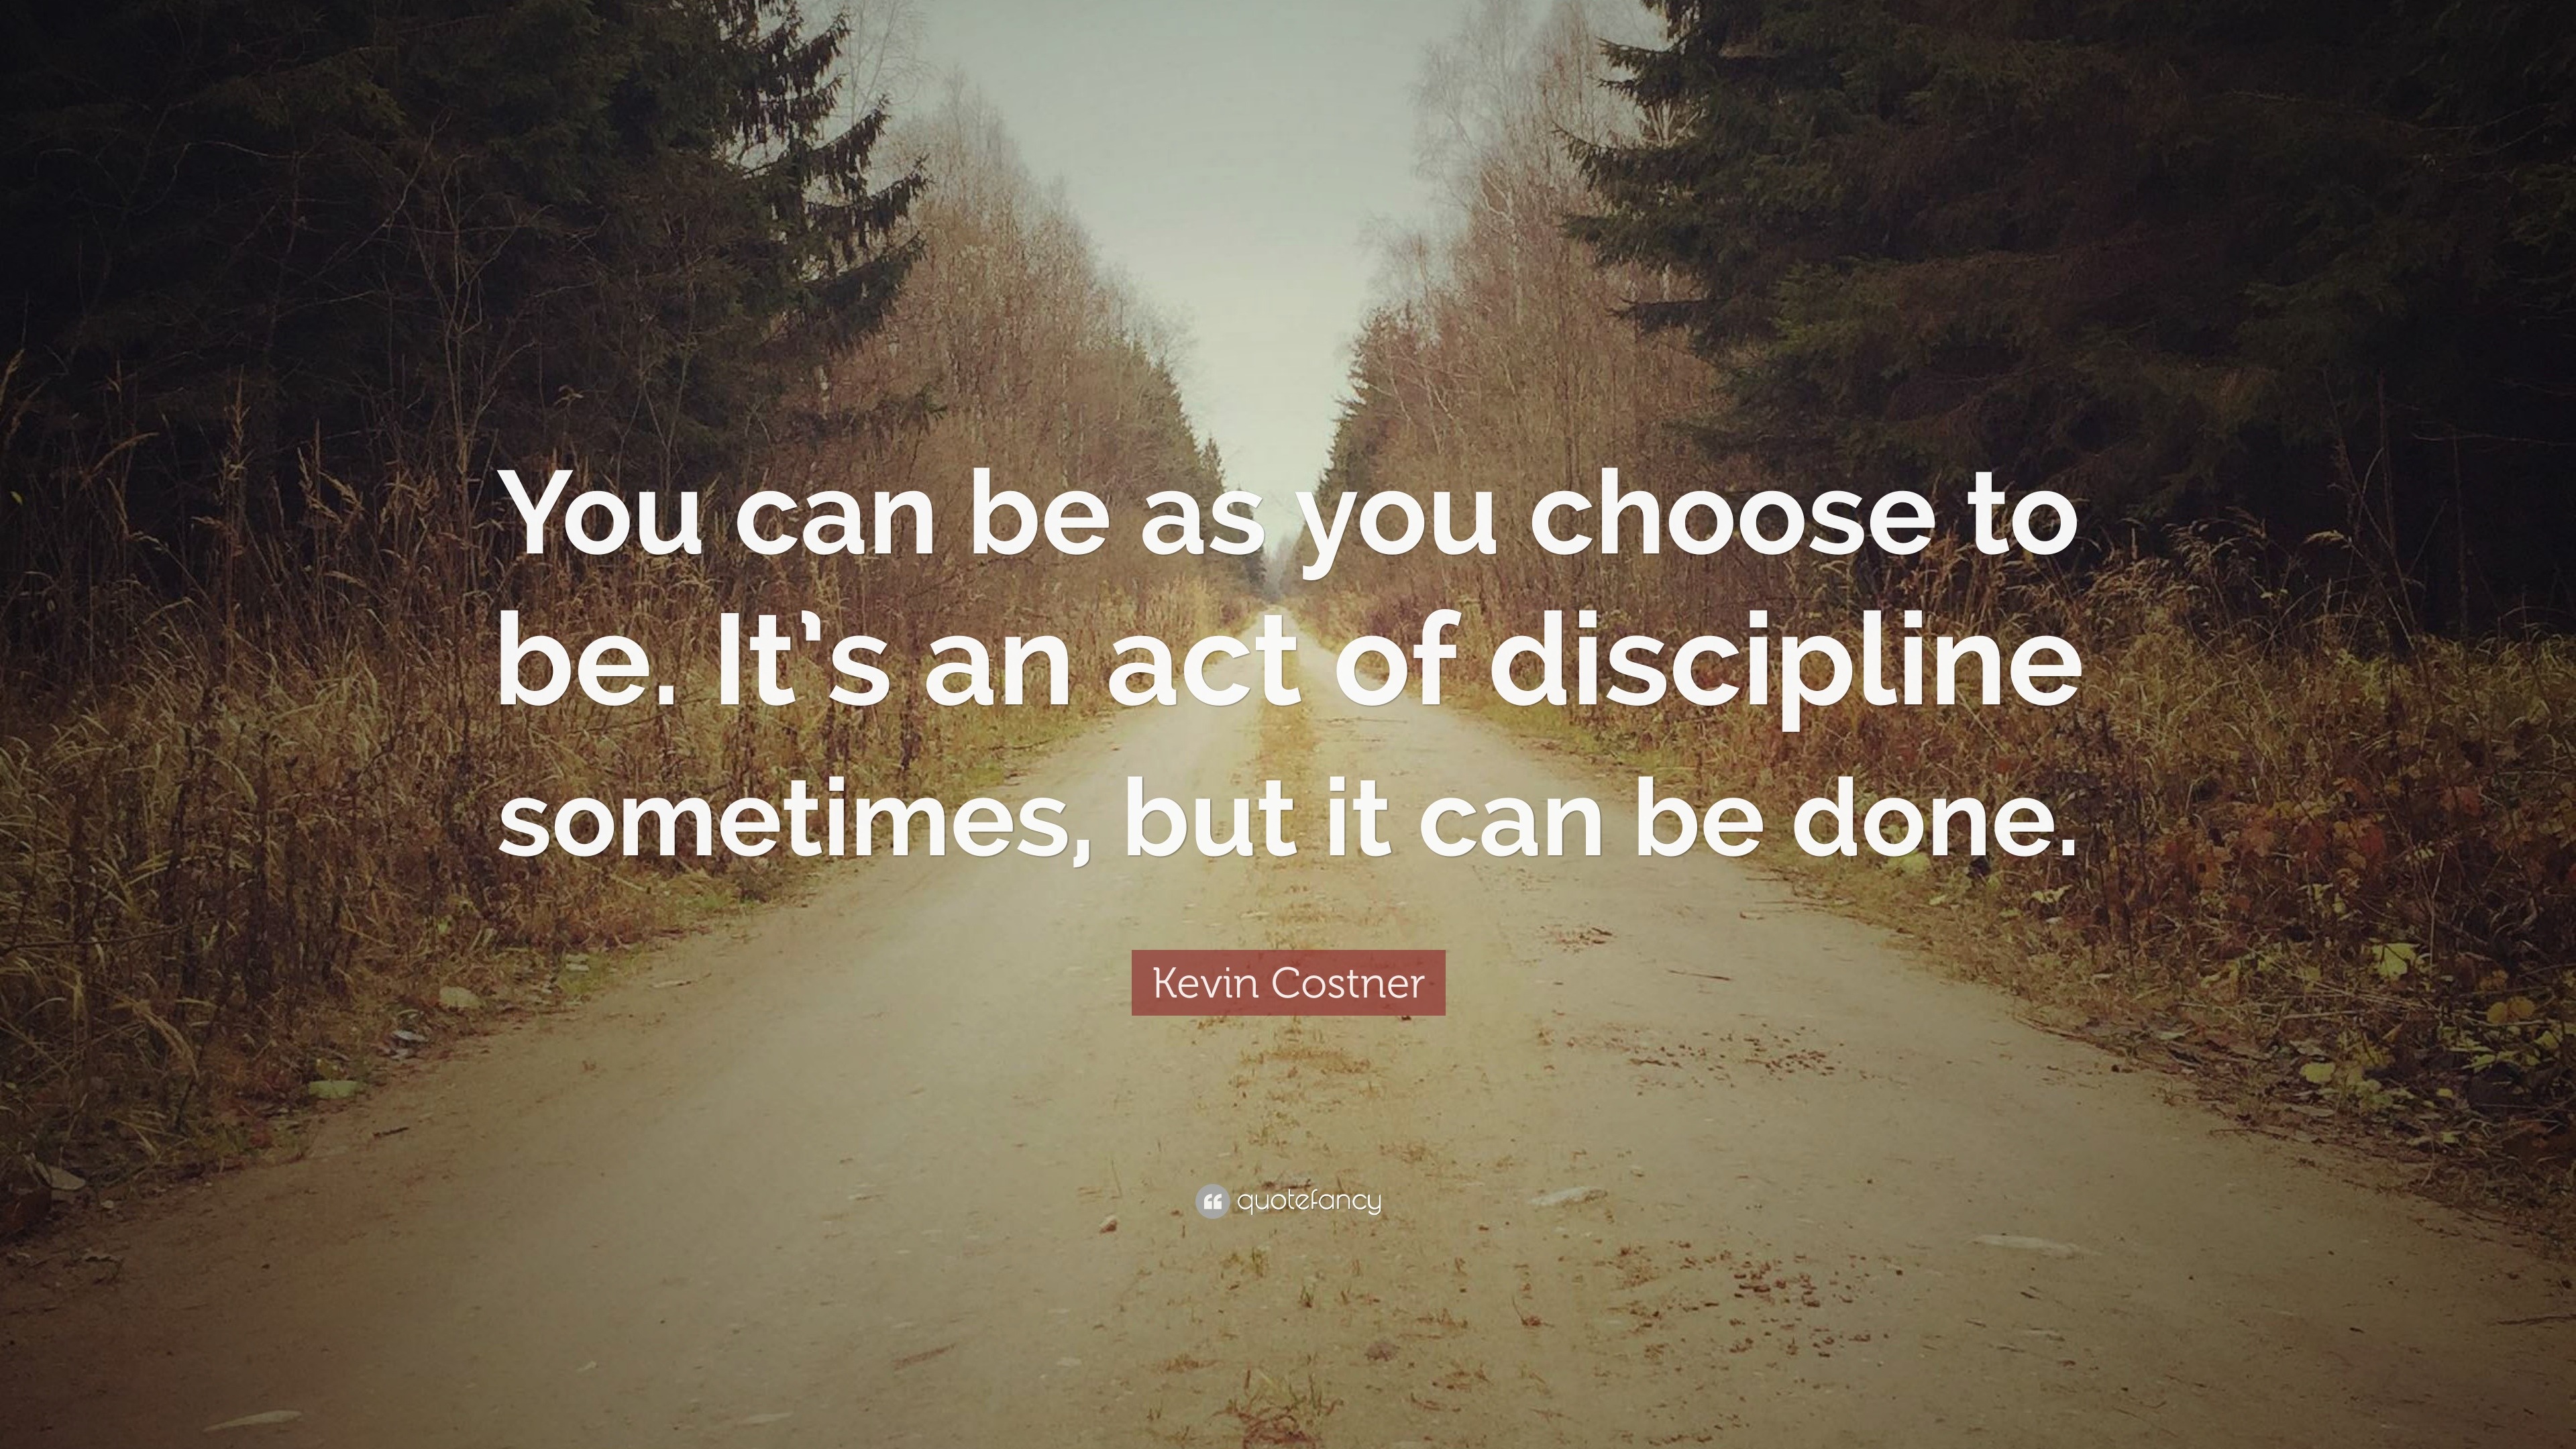 Kevin Costner Quote: “You can be as you choose to be. It’s an act of ...